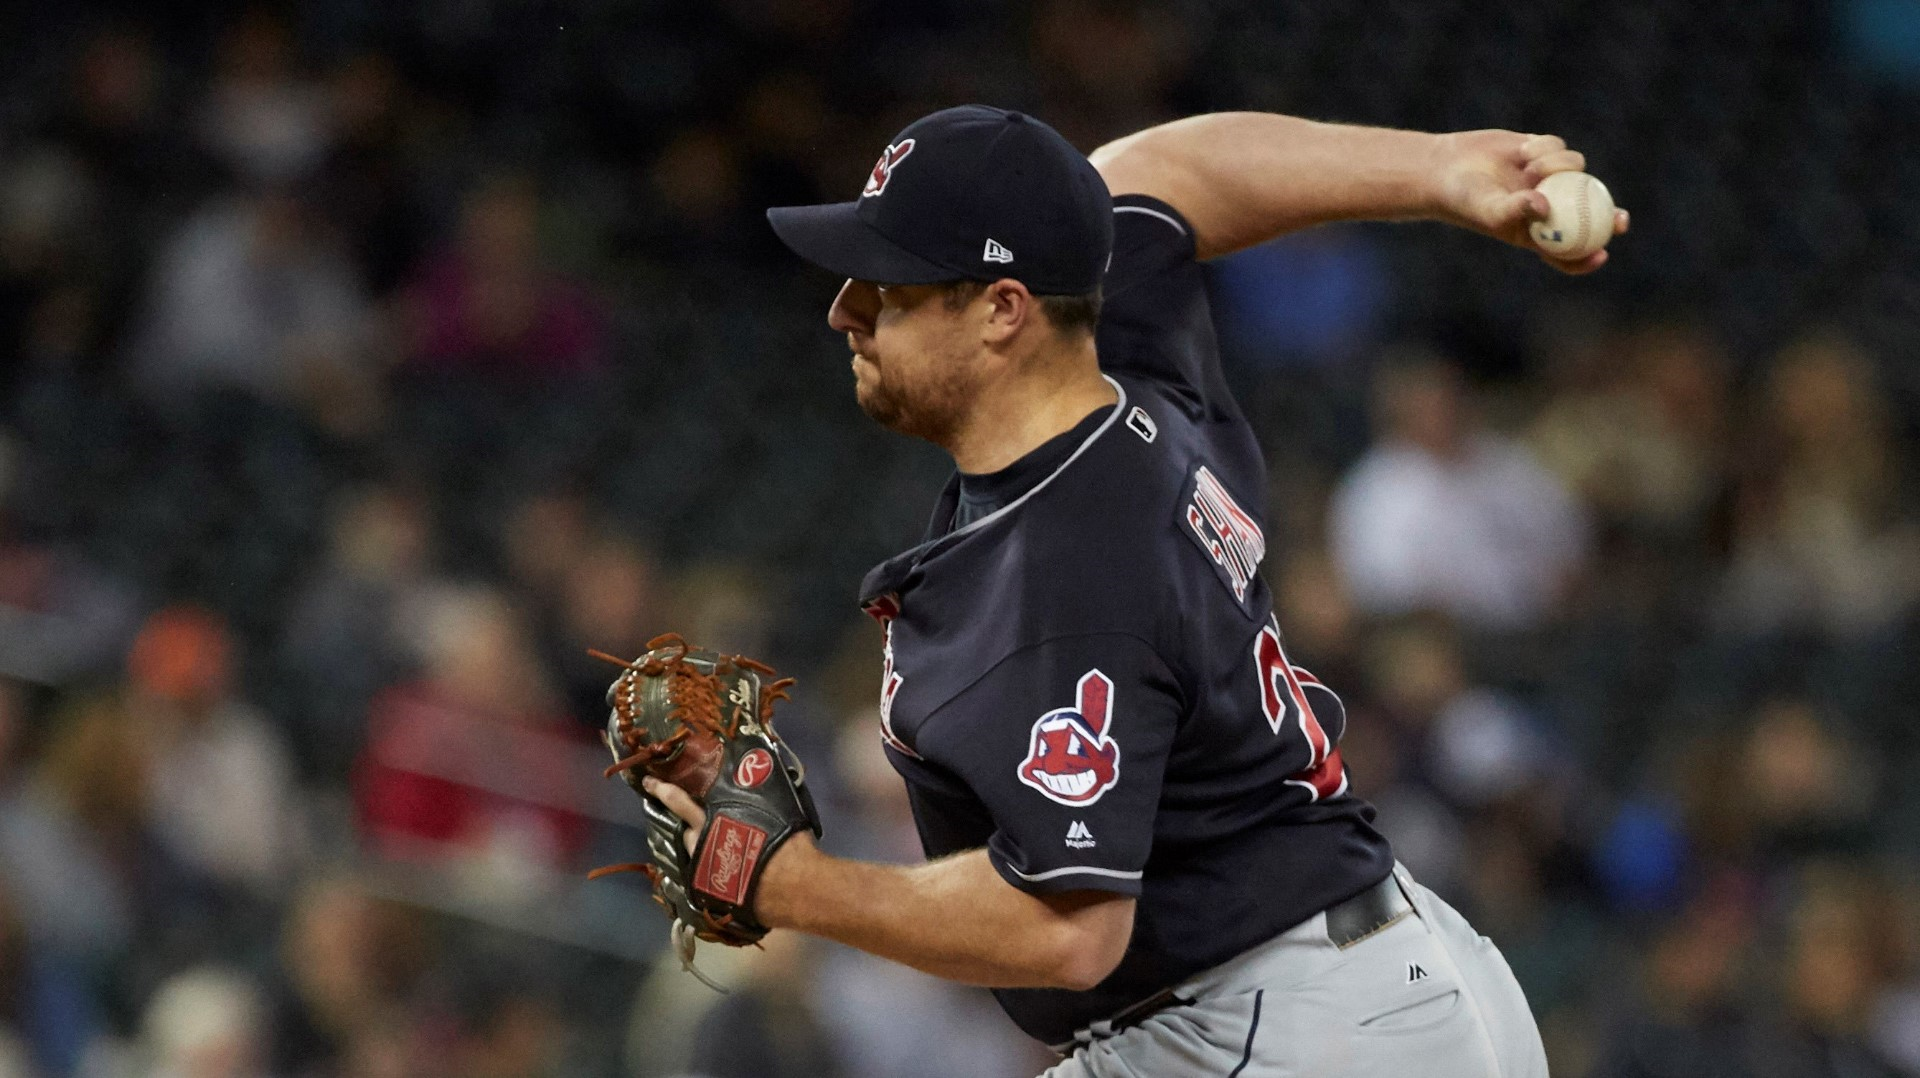 REPORT | Cleveland Indians reliever Bryan Shaw agrees to 3-year deal ...